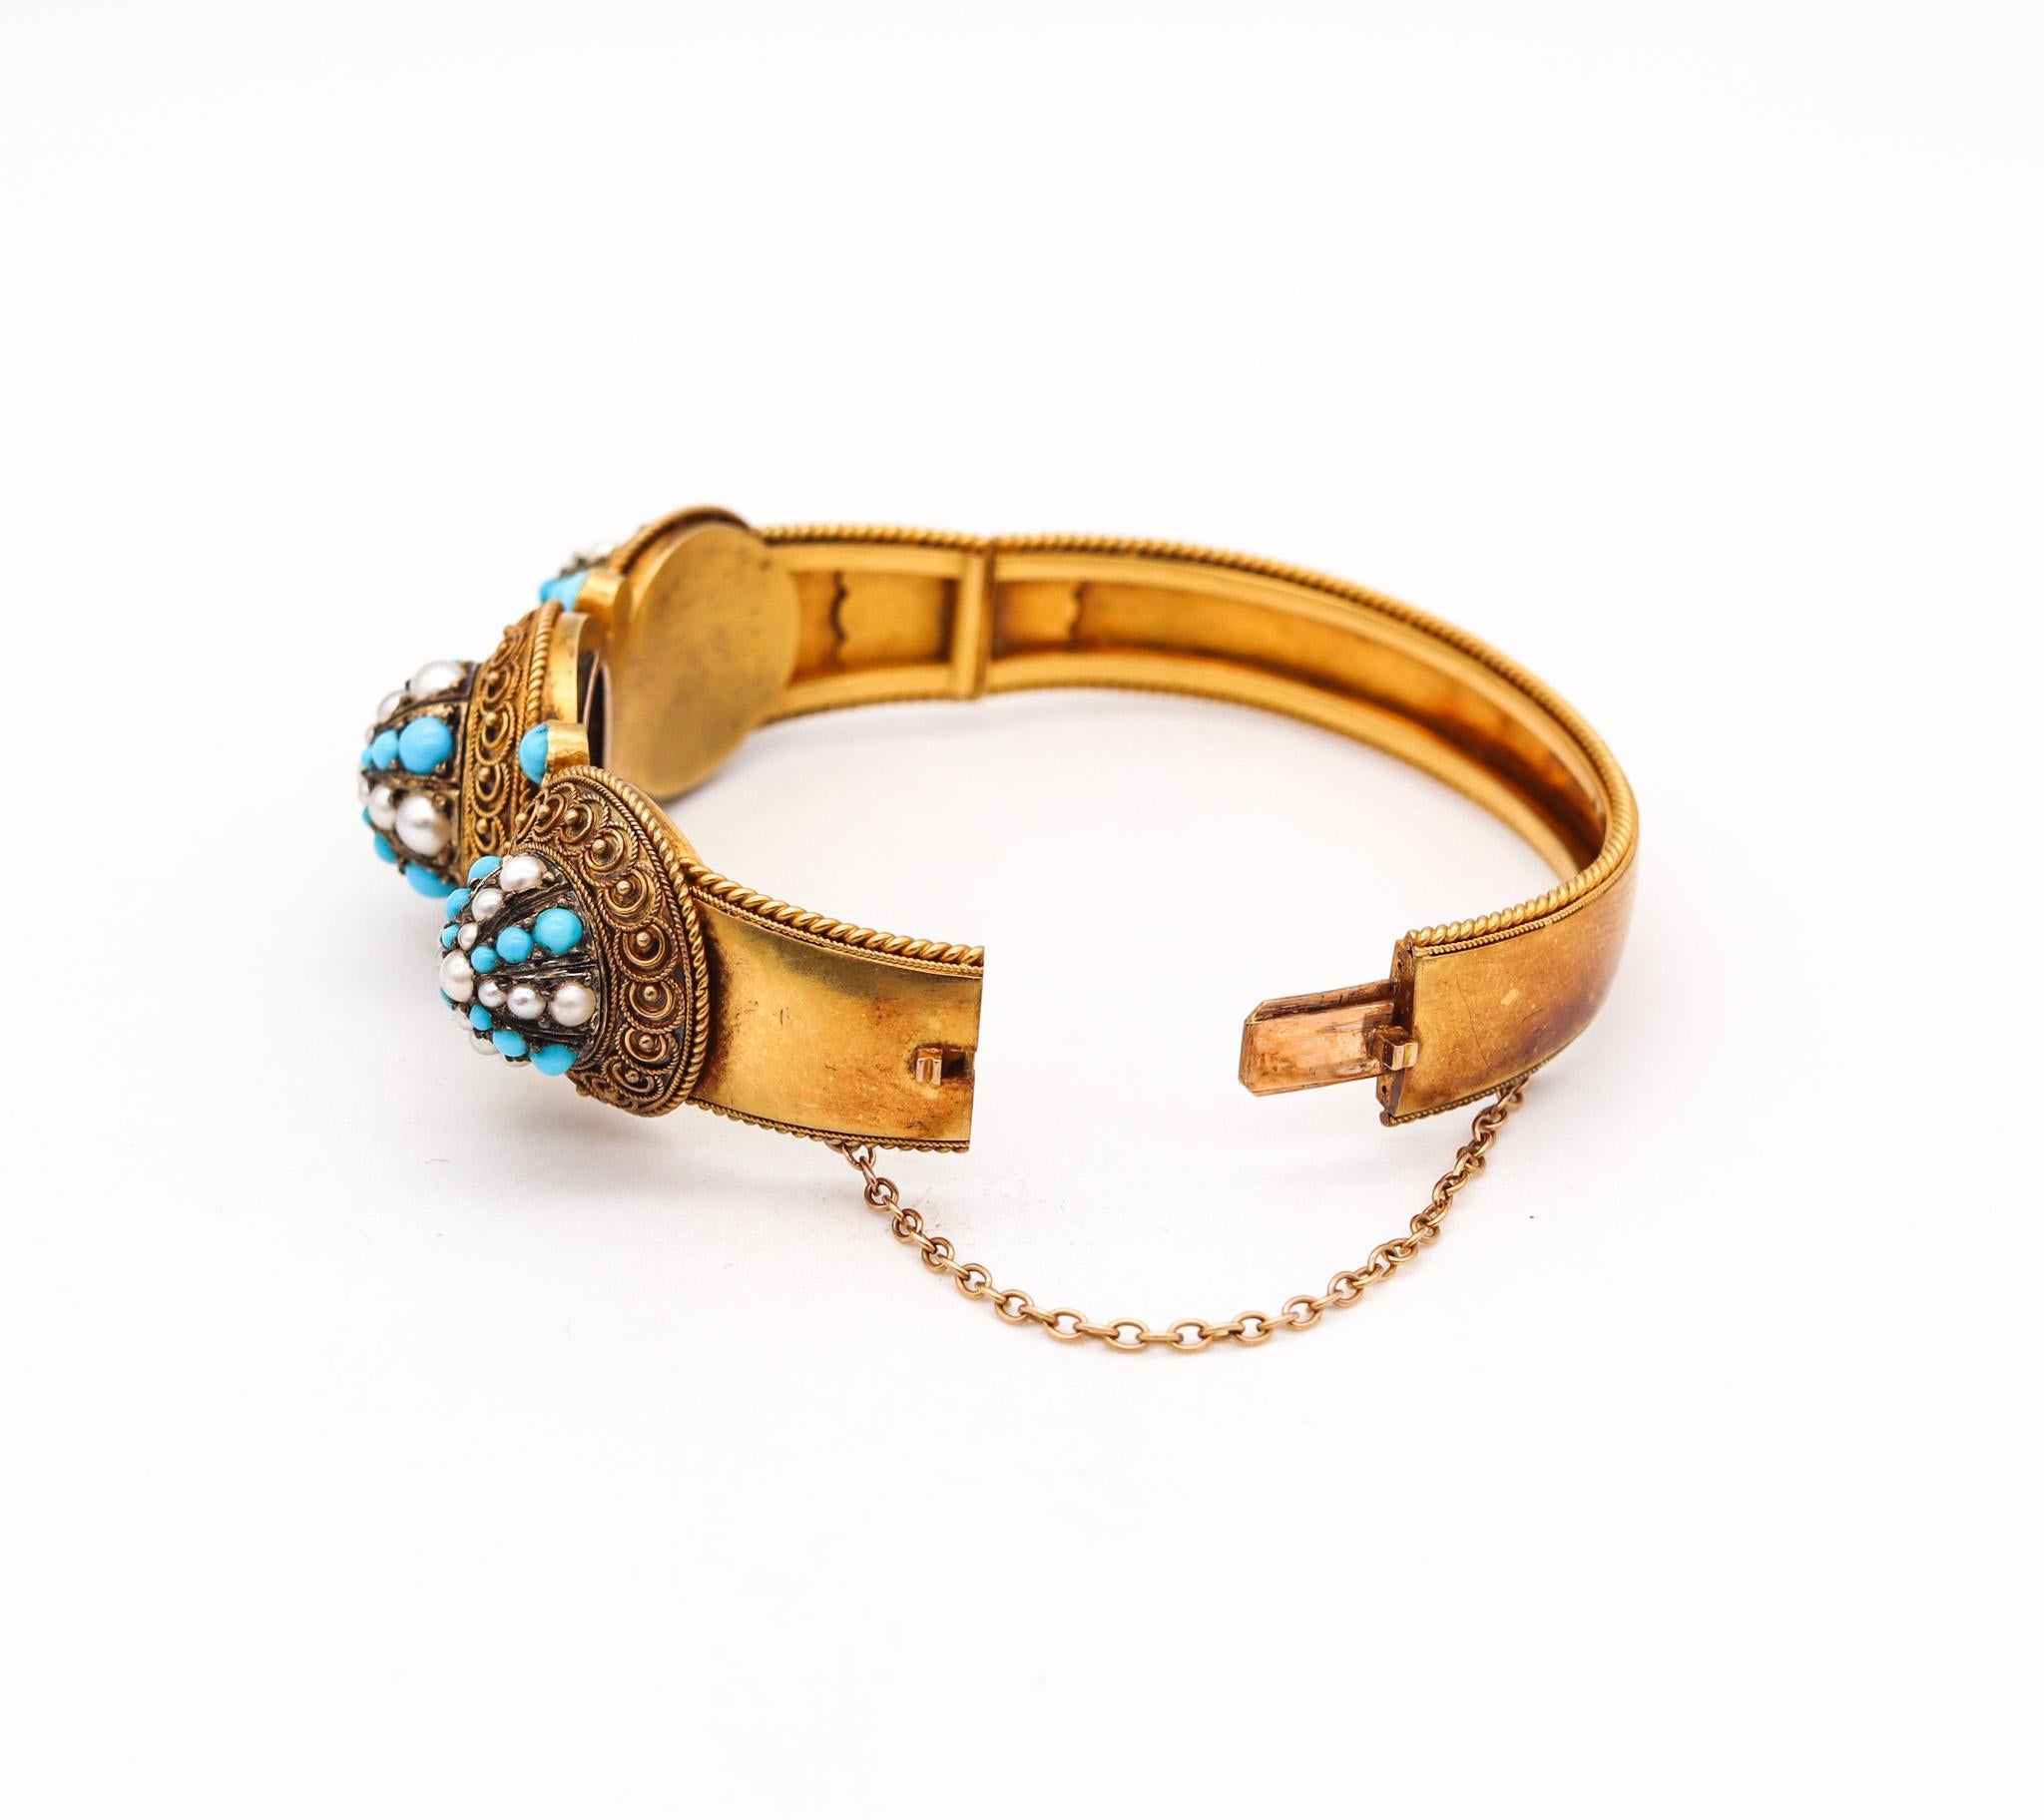 Victorian 1880 Etruscan Revival Bracelet in 15kt Gold with Turquoises and Pearls In Excellent Condition For Sale In Miami, FL